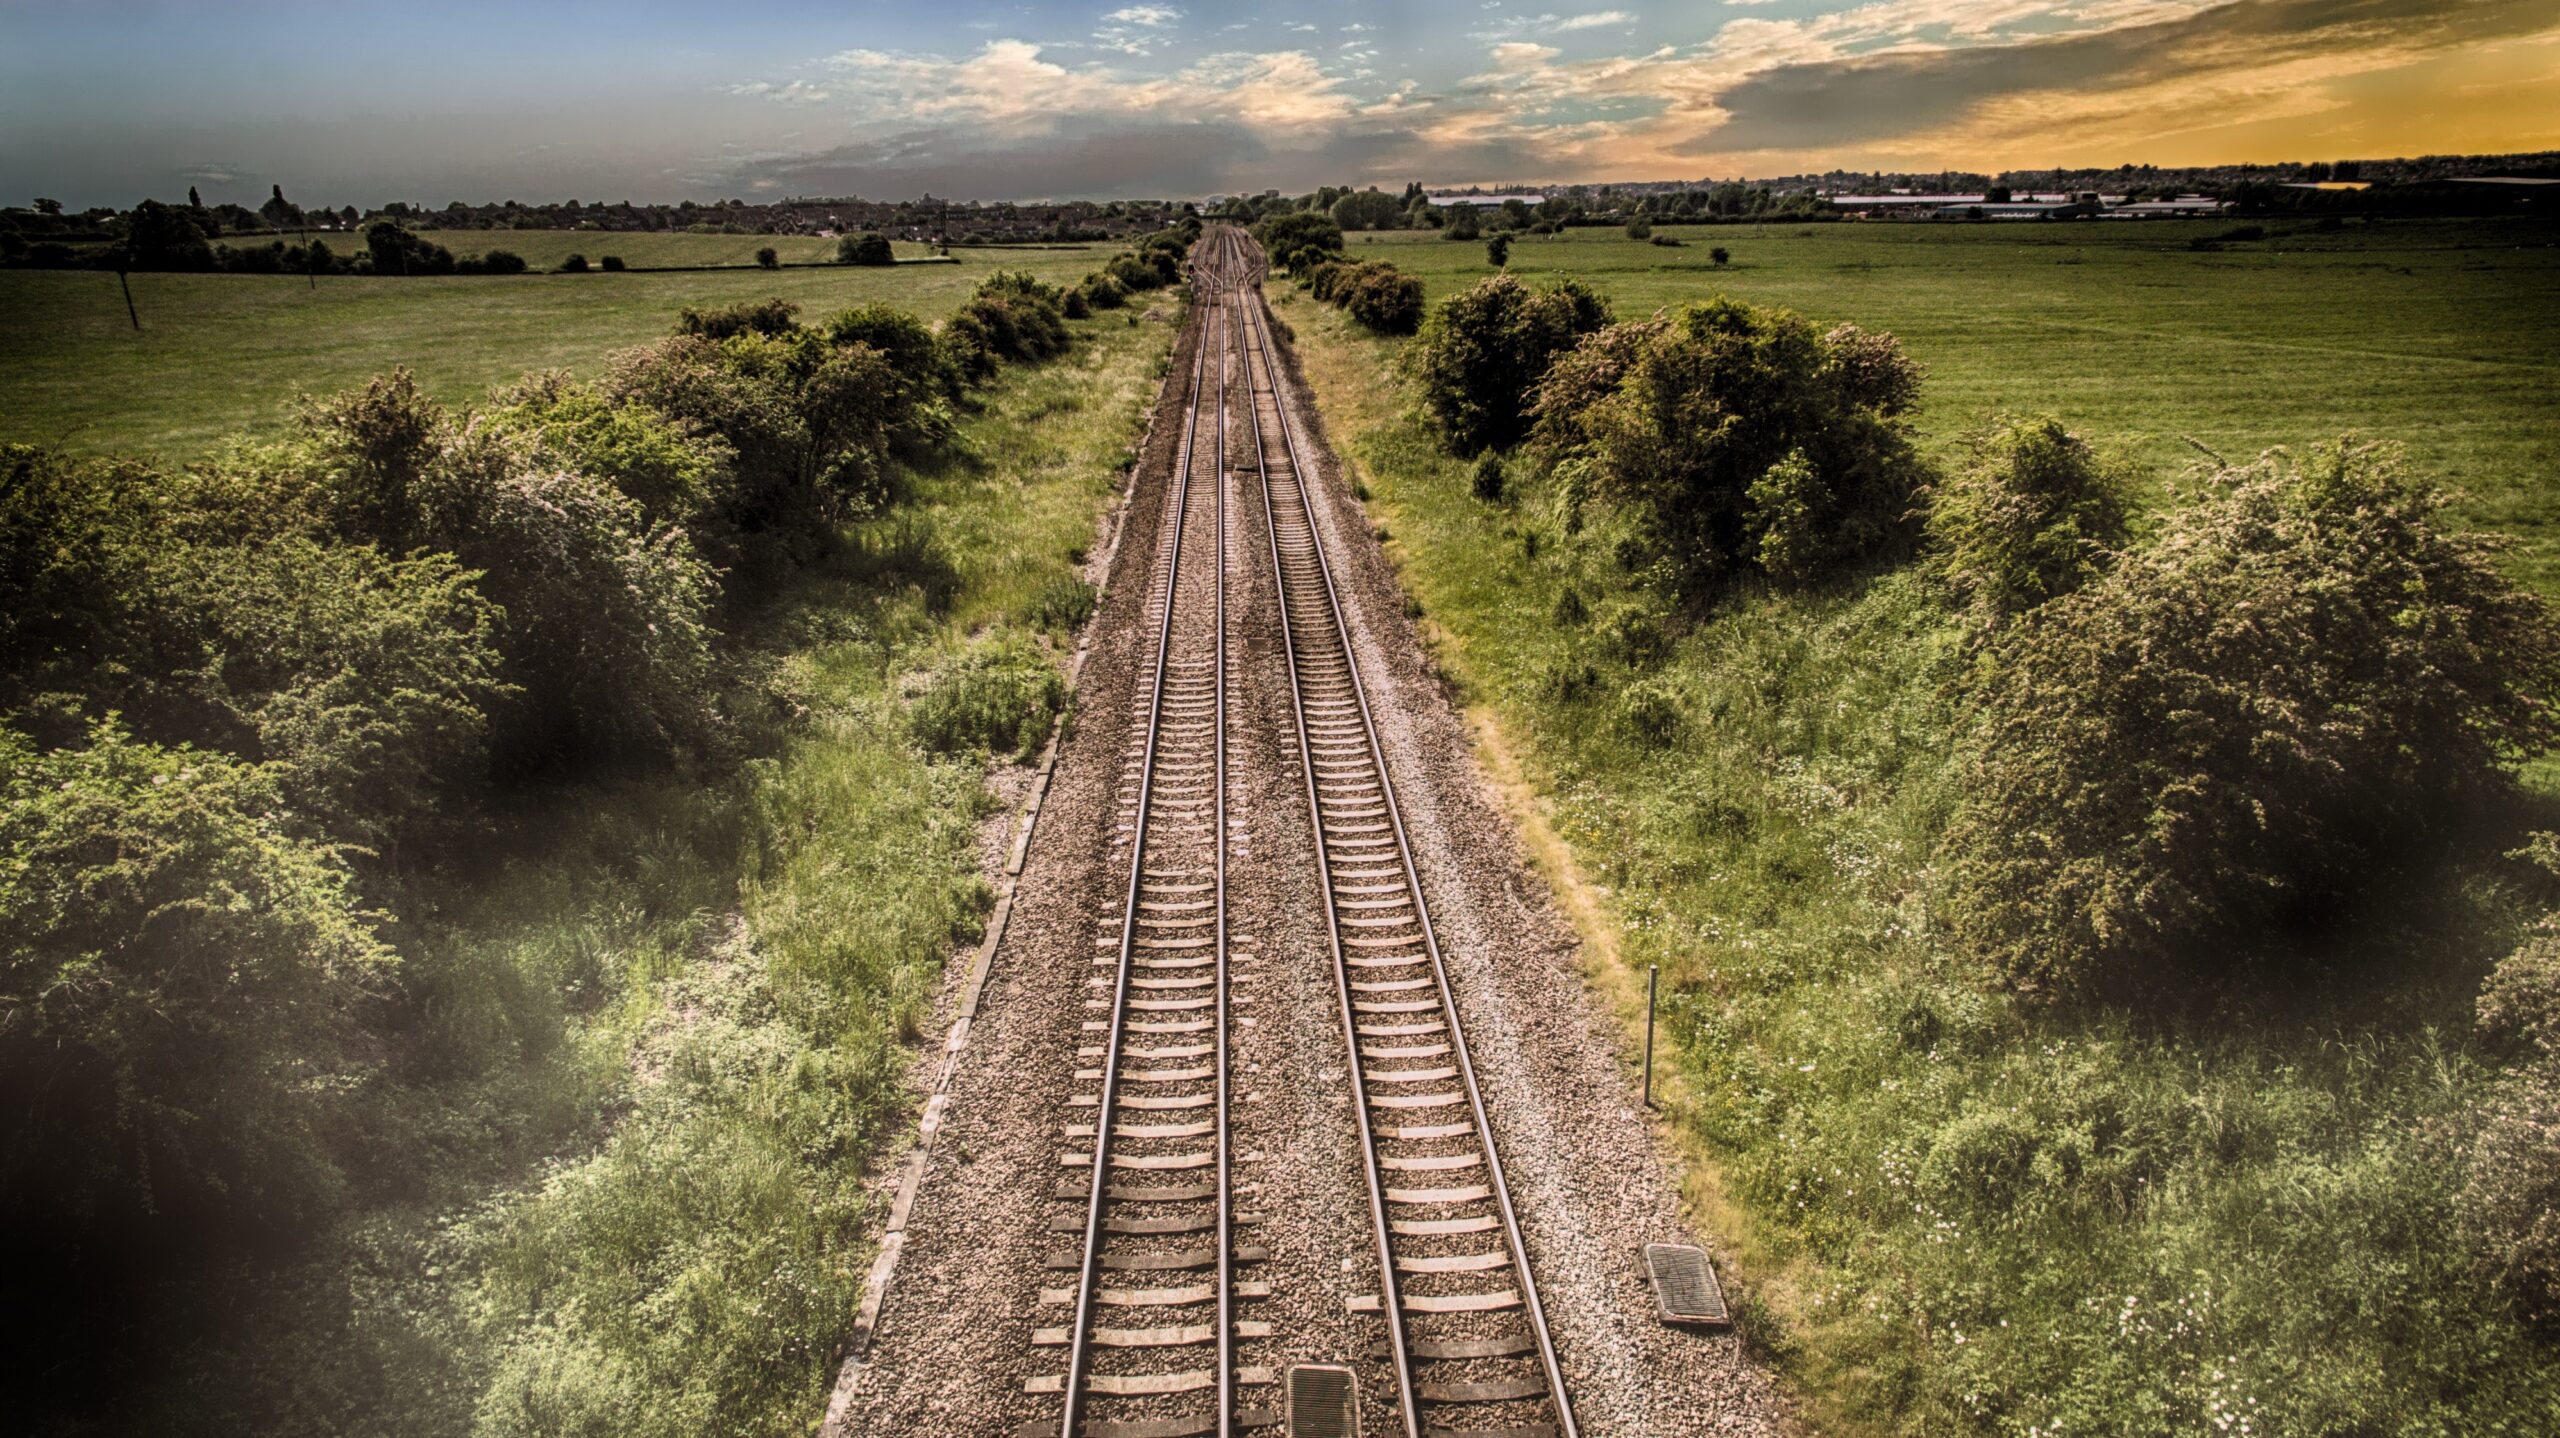 train tracks thinning to vanishing point through landscape with